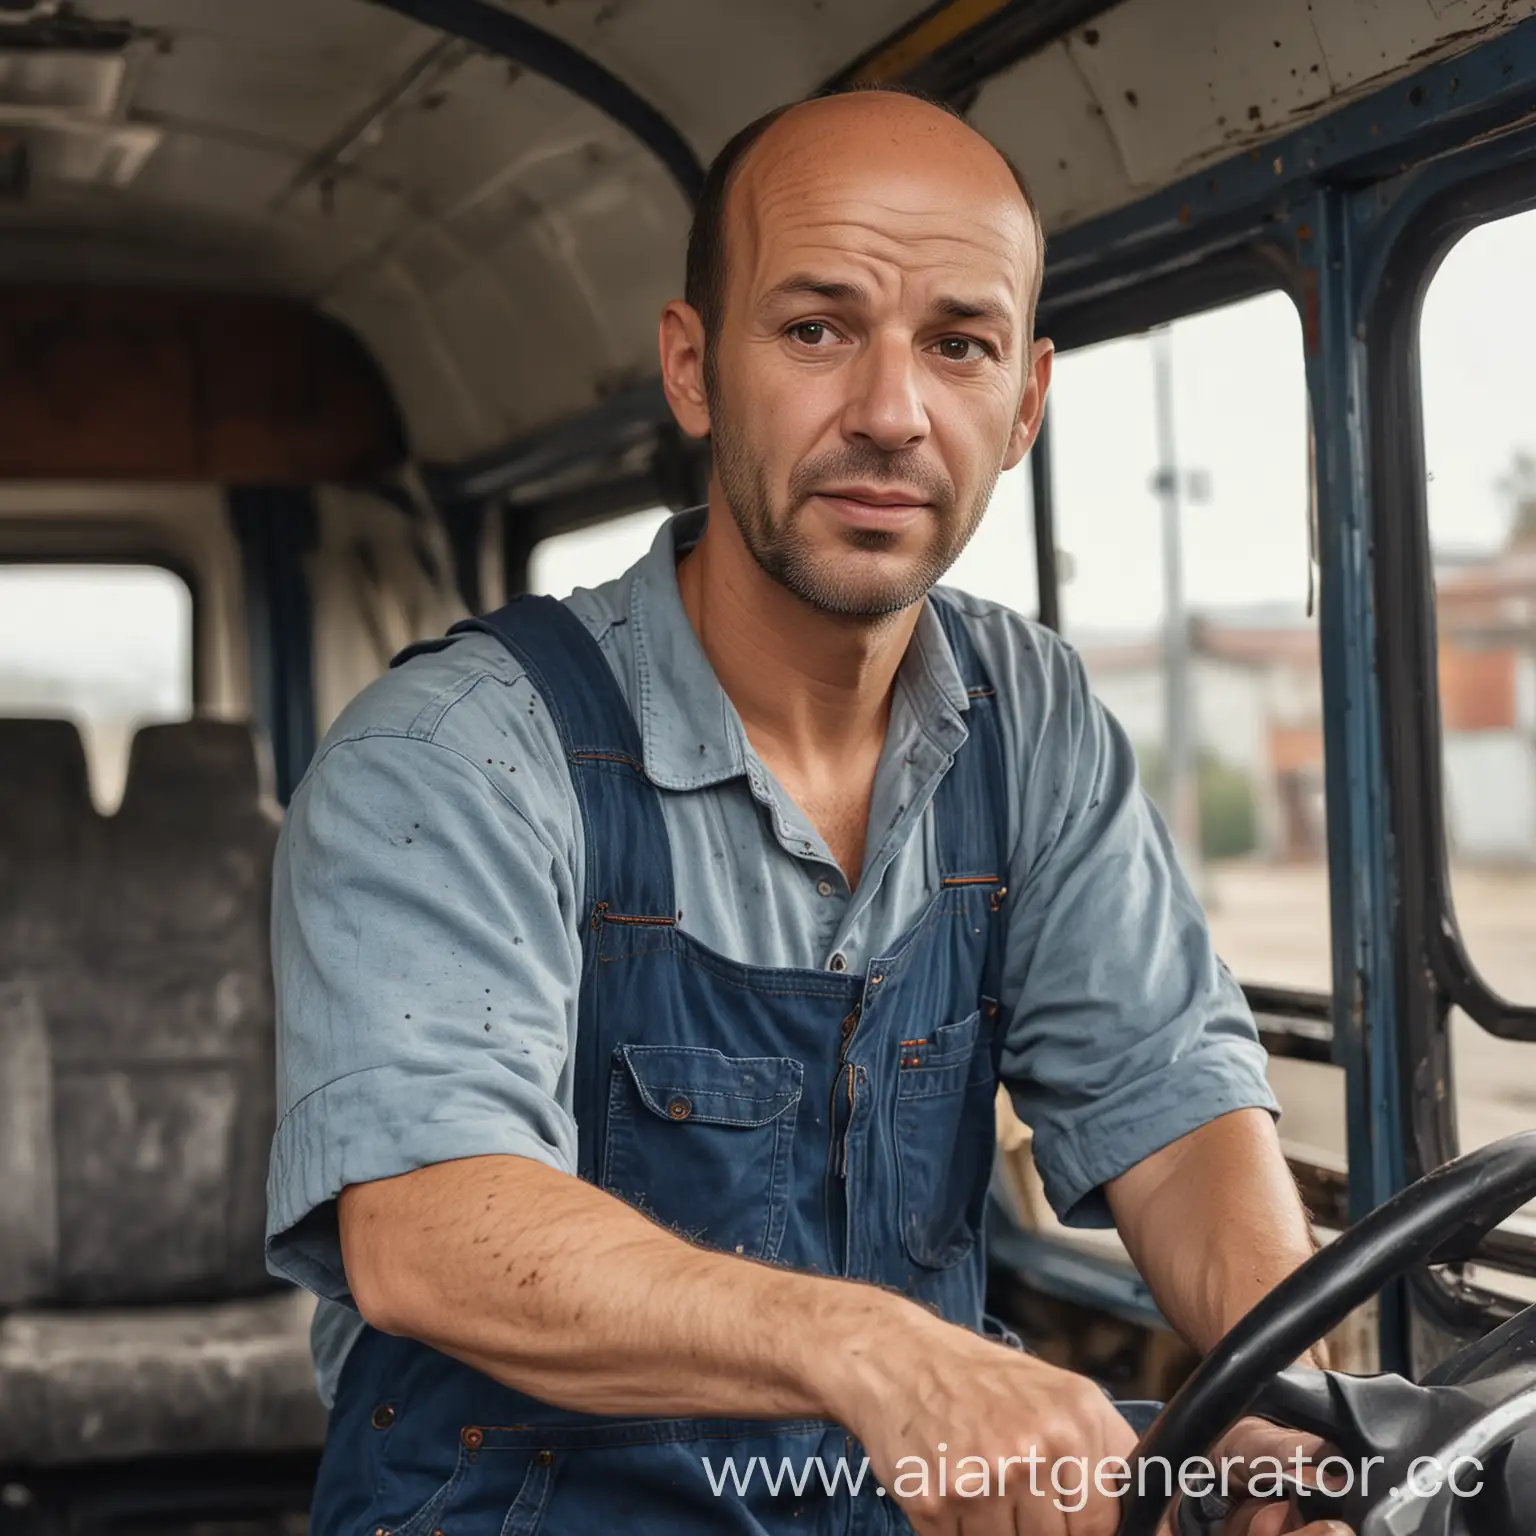 Friendly-Balding-Mechanic-Driving-Bus-in-Stained-Overalls